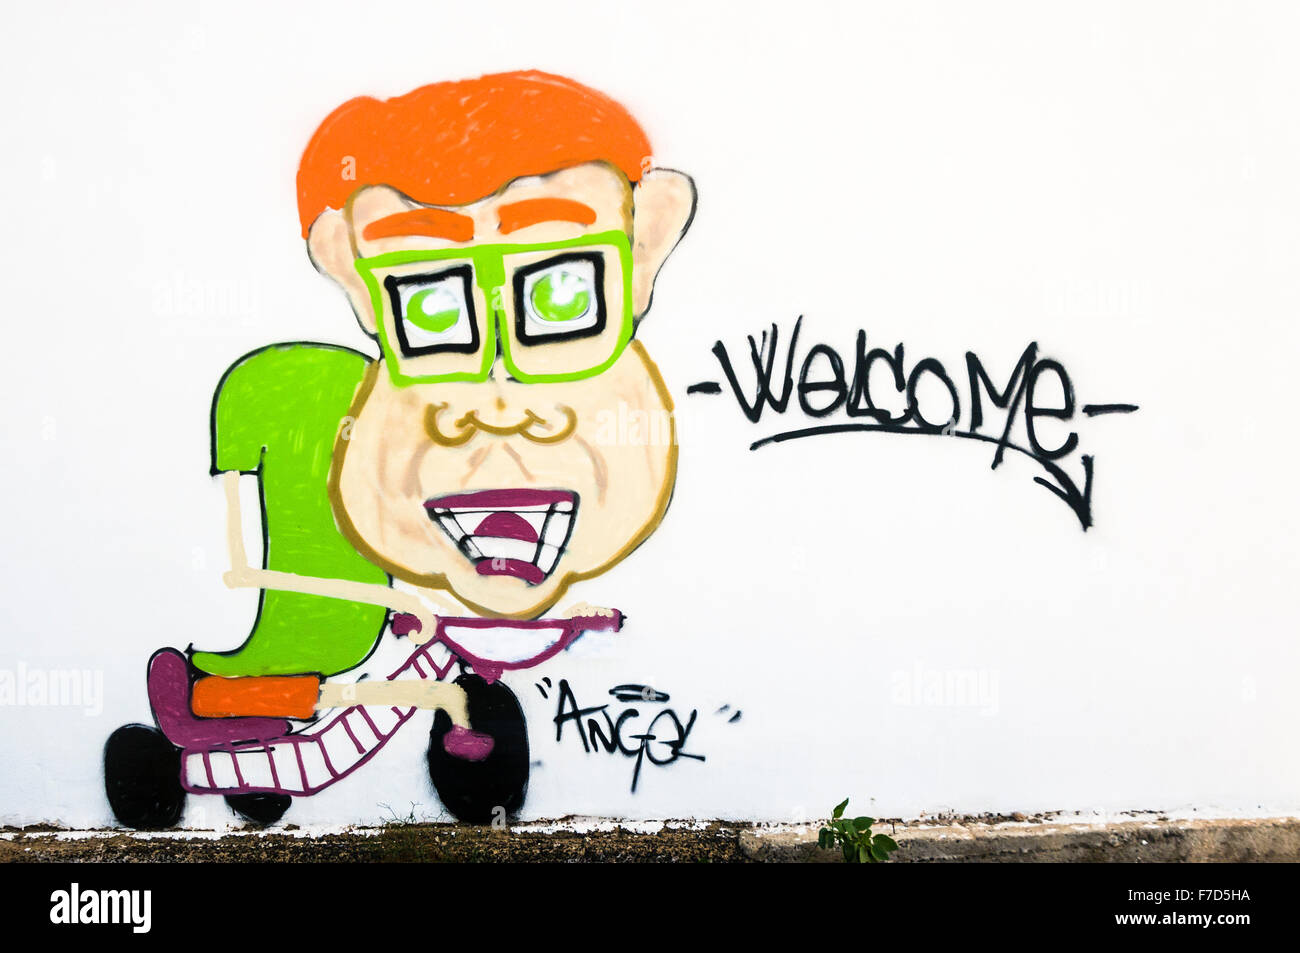 Graffiti painted on a white wall of a boy on a scooter saying 'Welcome' Stock Photo